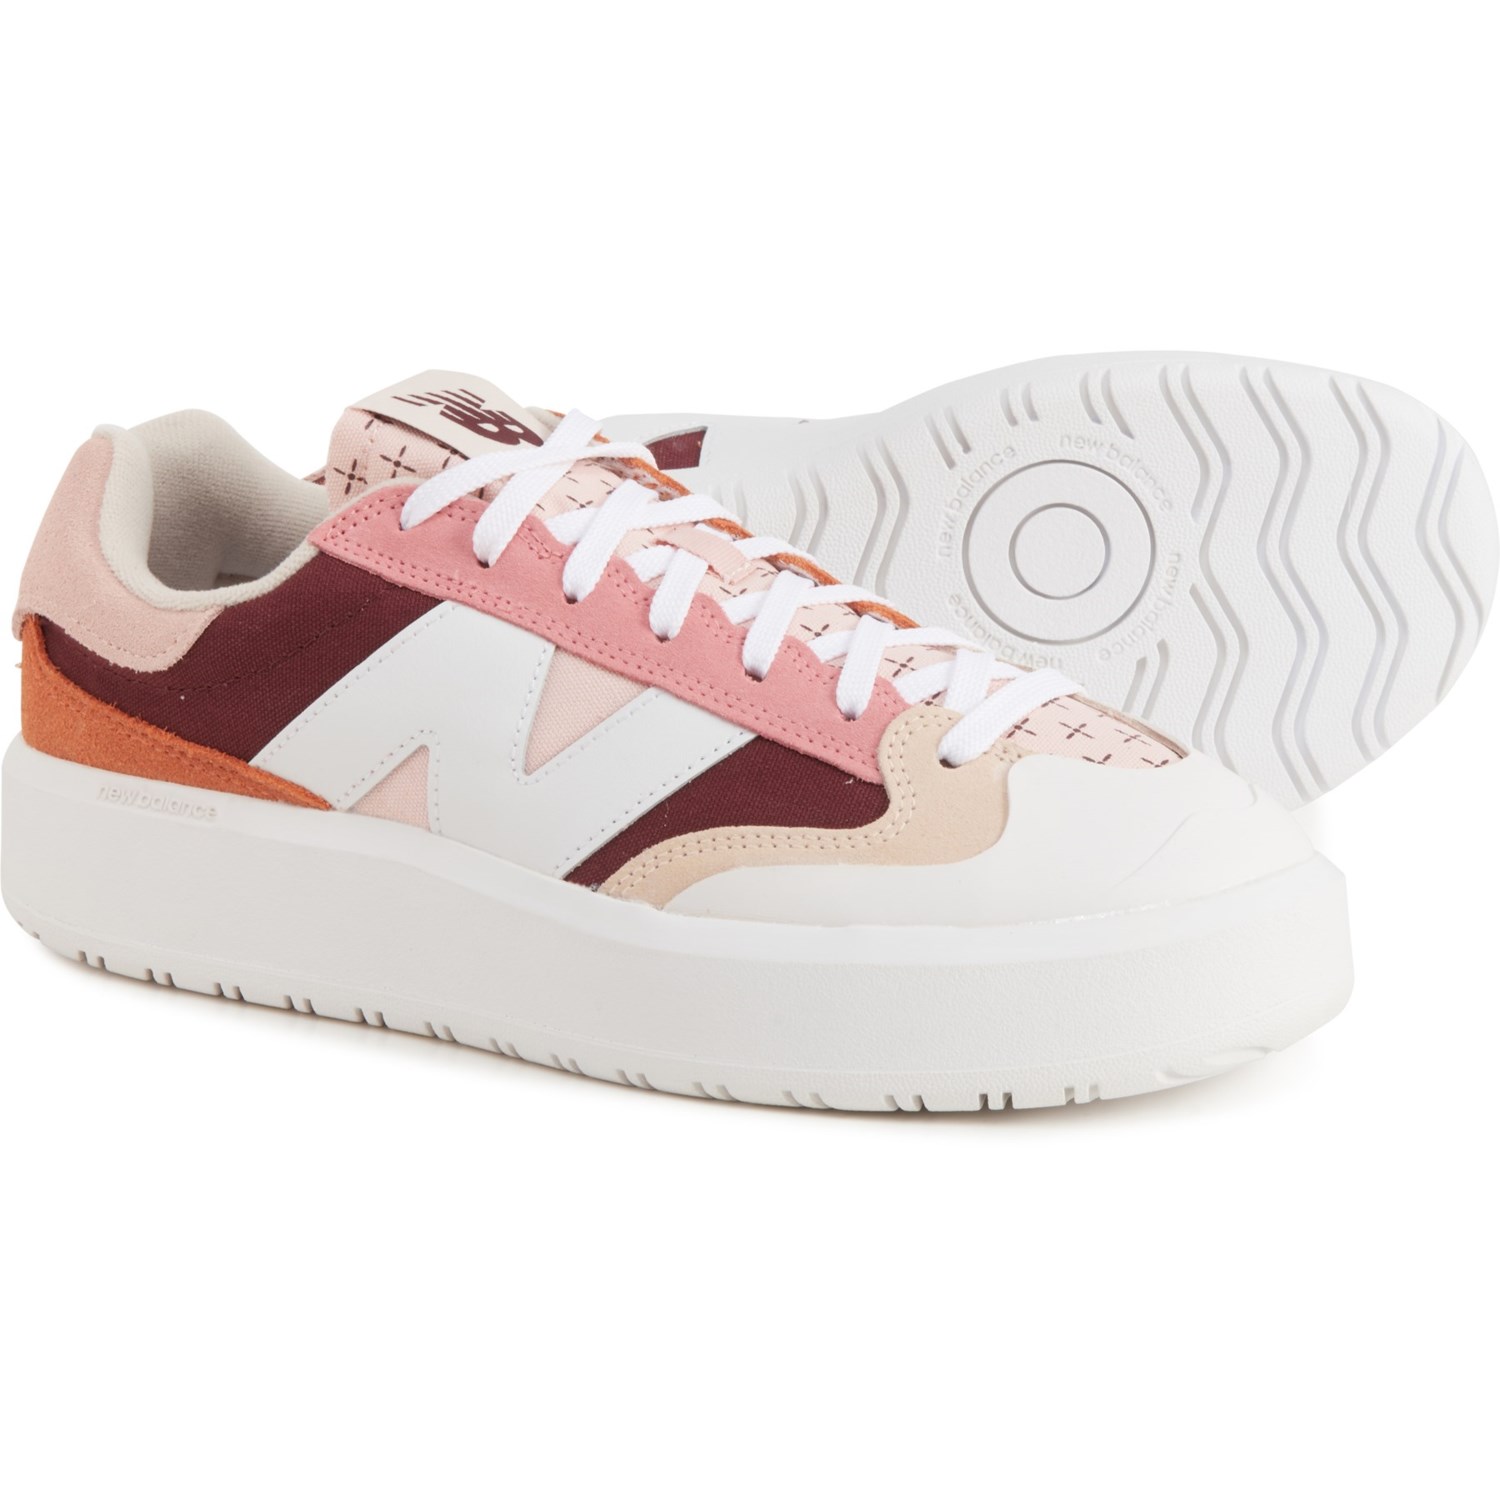 New Balance CT302 Sneakers - Leather (For Men)